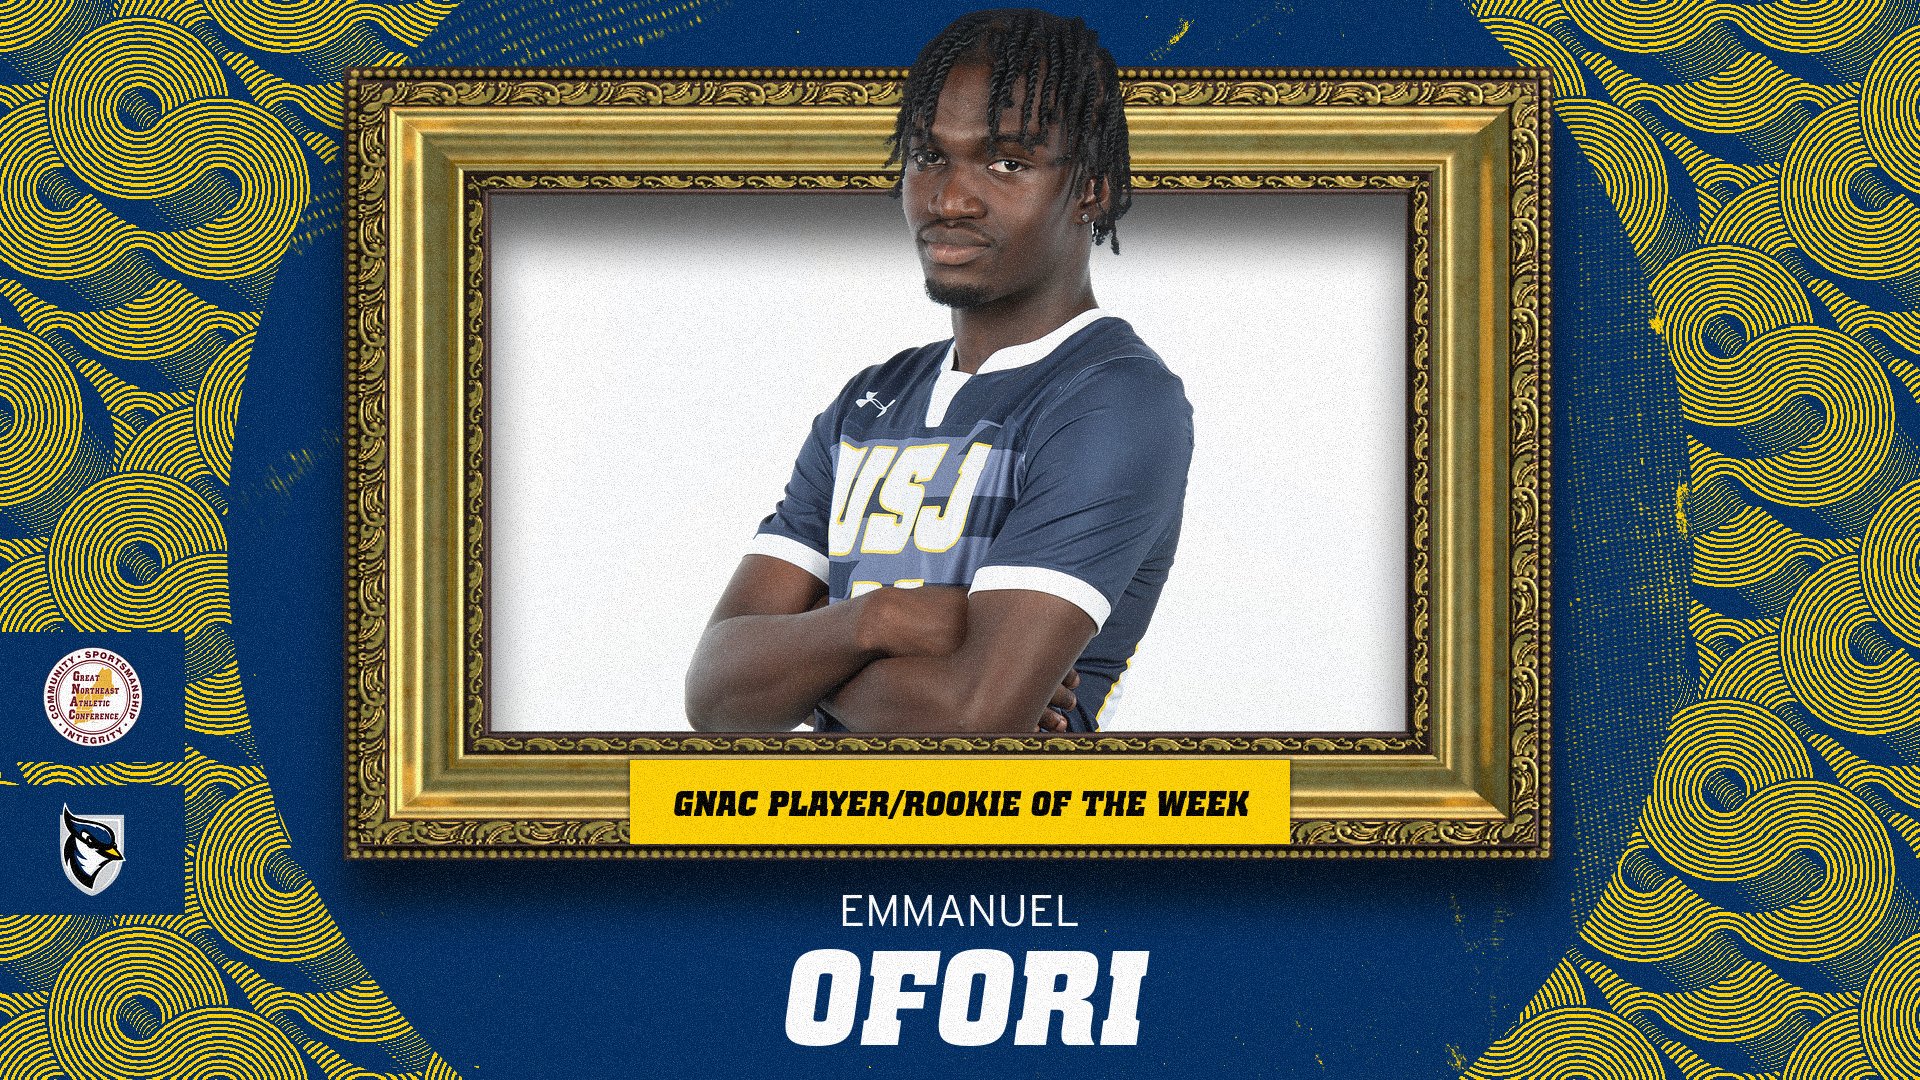 Ofori Named GNAC Player and Rookie of the Week